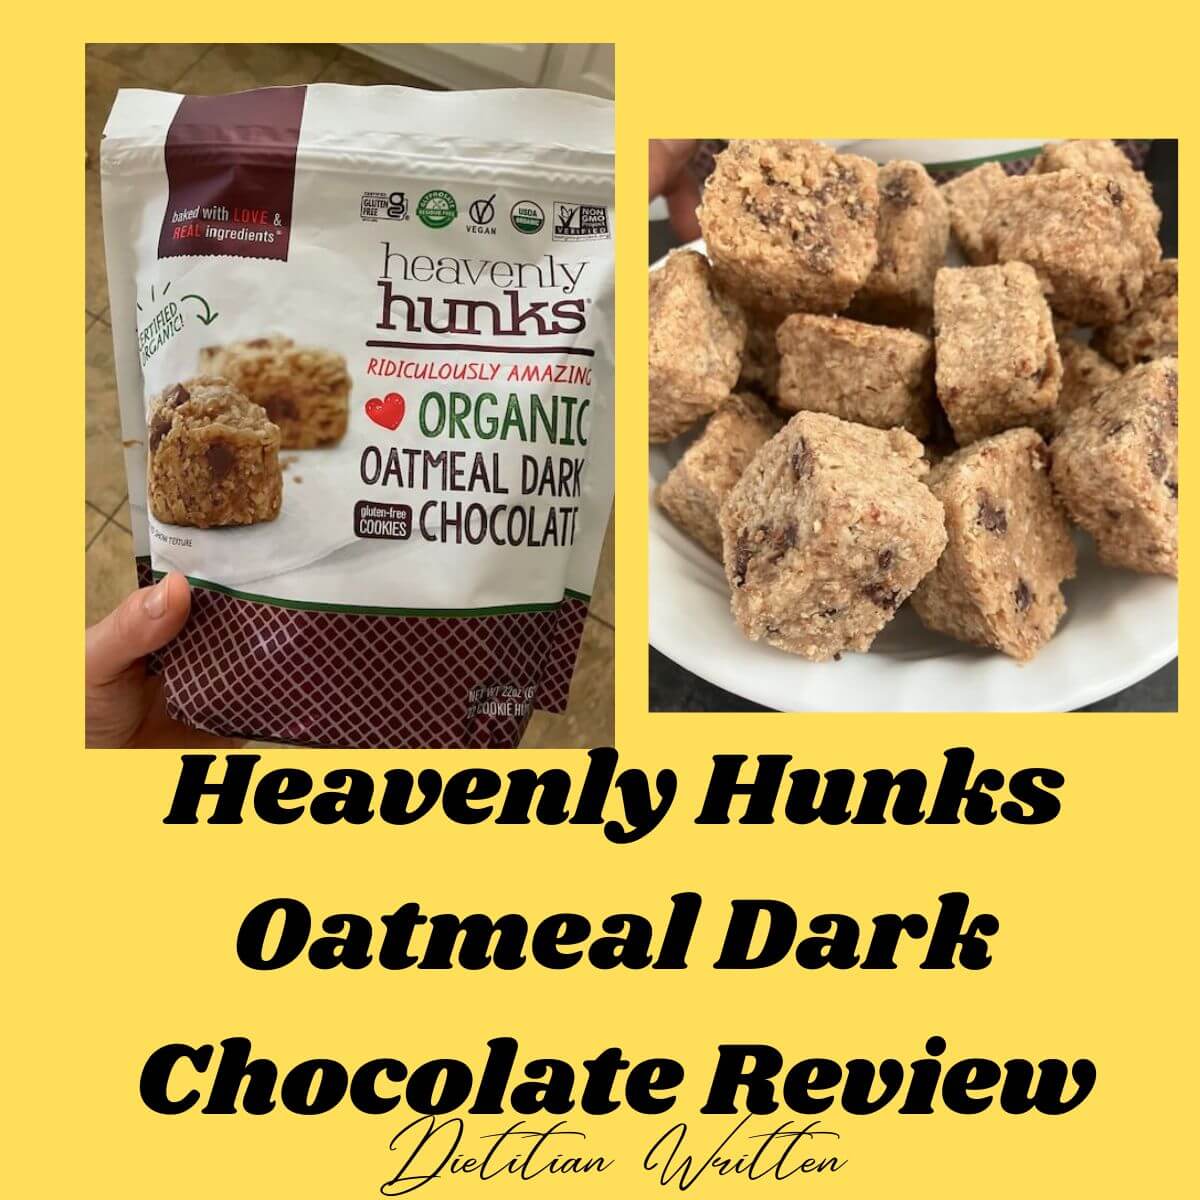 Picture of a package of heavenly hunks oatmeal dark chocolate, and a plate full of them. Text reads: Heavenly hunks oatmeal dark chocolate review dietitian written